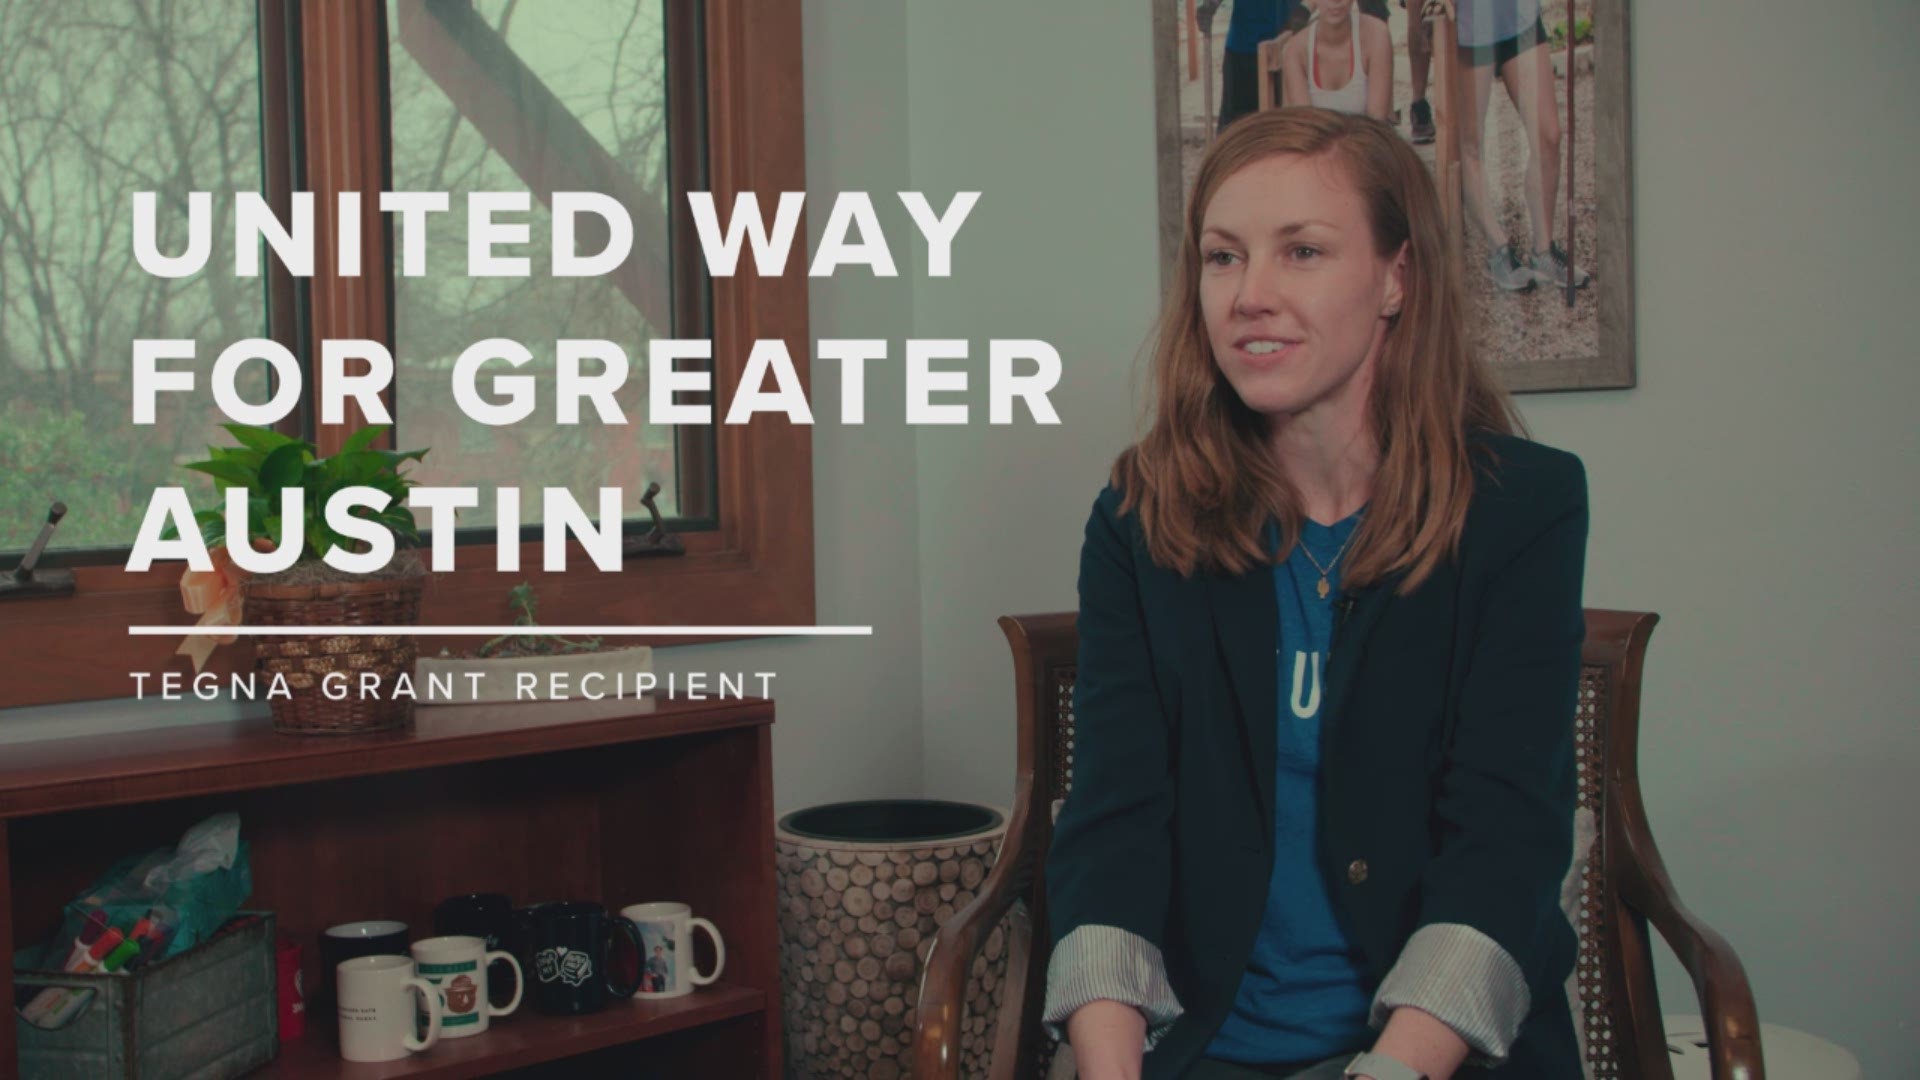 Interview with United Way for Greater Austin's Director Shalyn Bravens